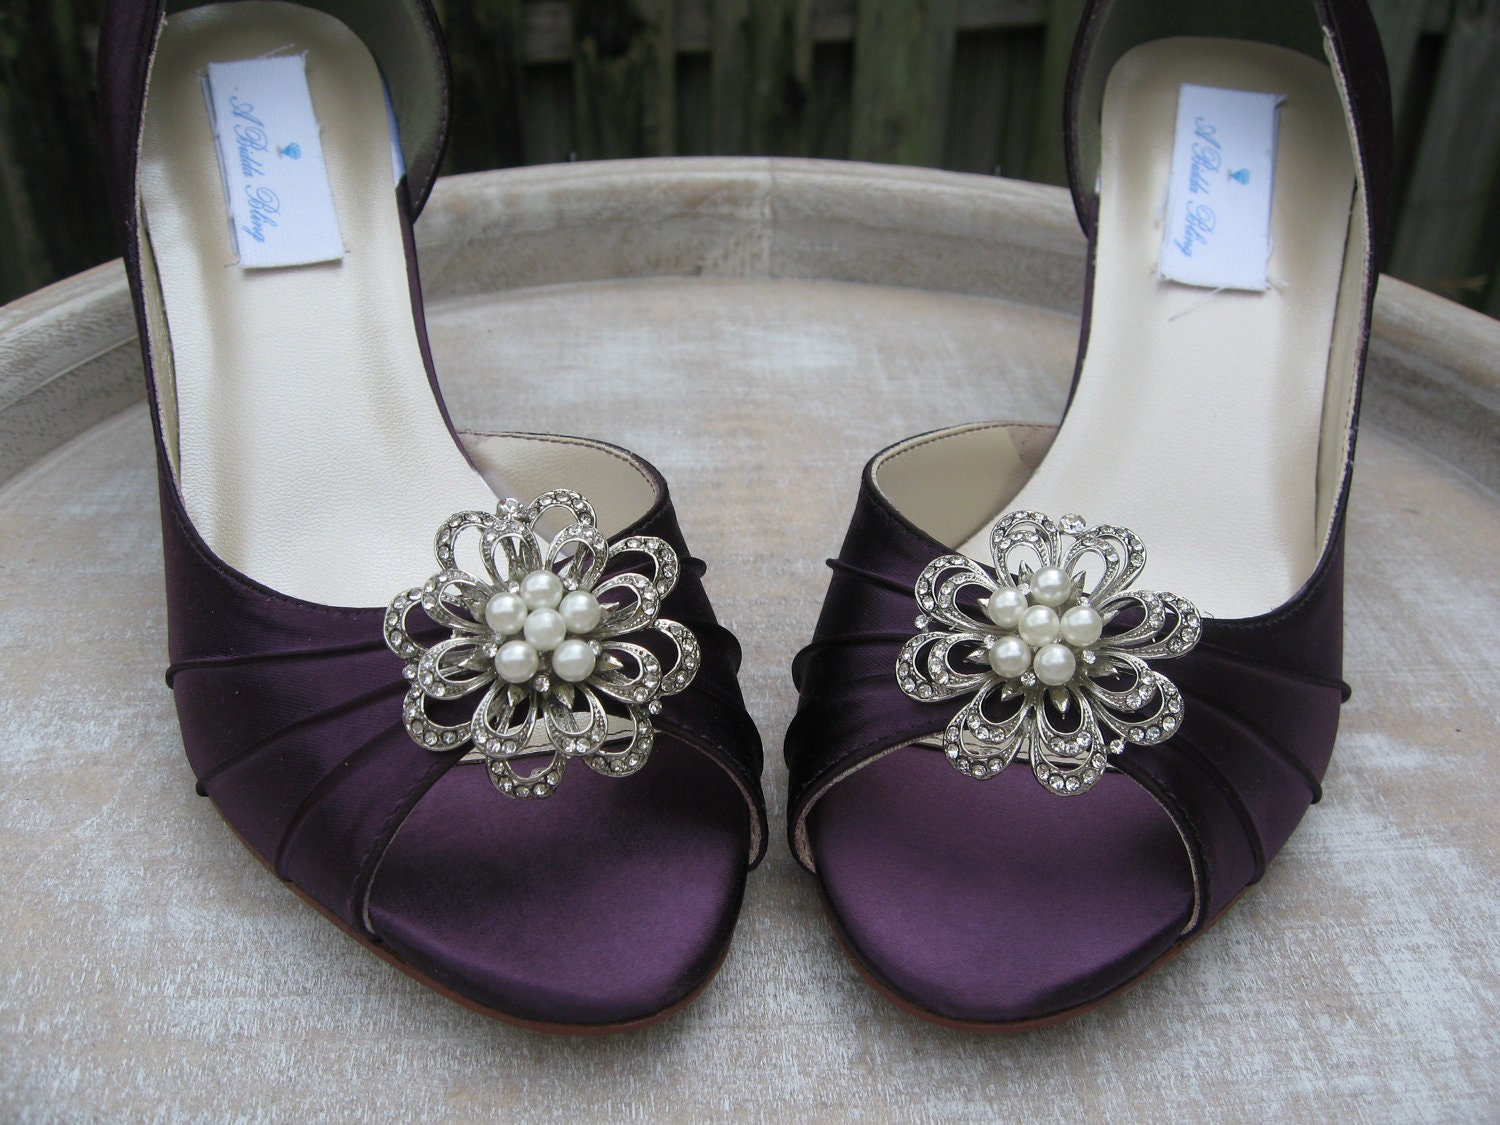 These vintage inspired eggplant purple shoes have been hand dyed and then embellished with a vintage style pearl and crystal brooch. Perfect for your wedding da